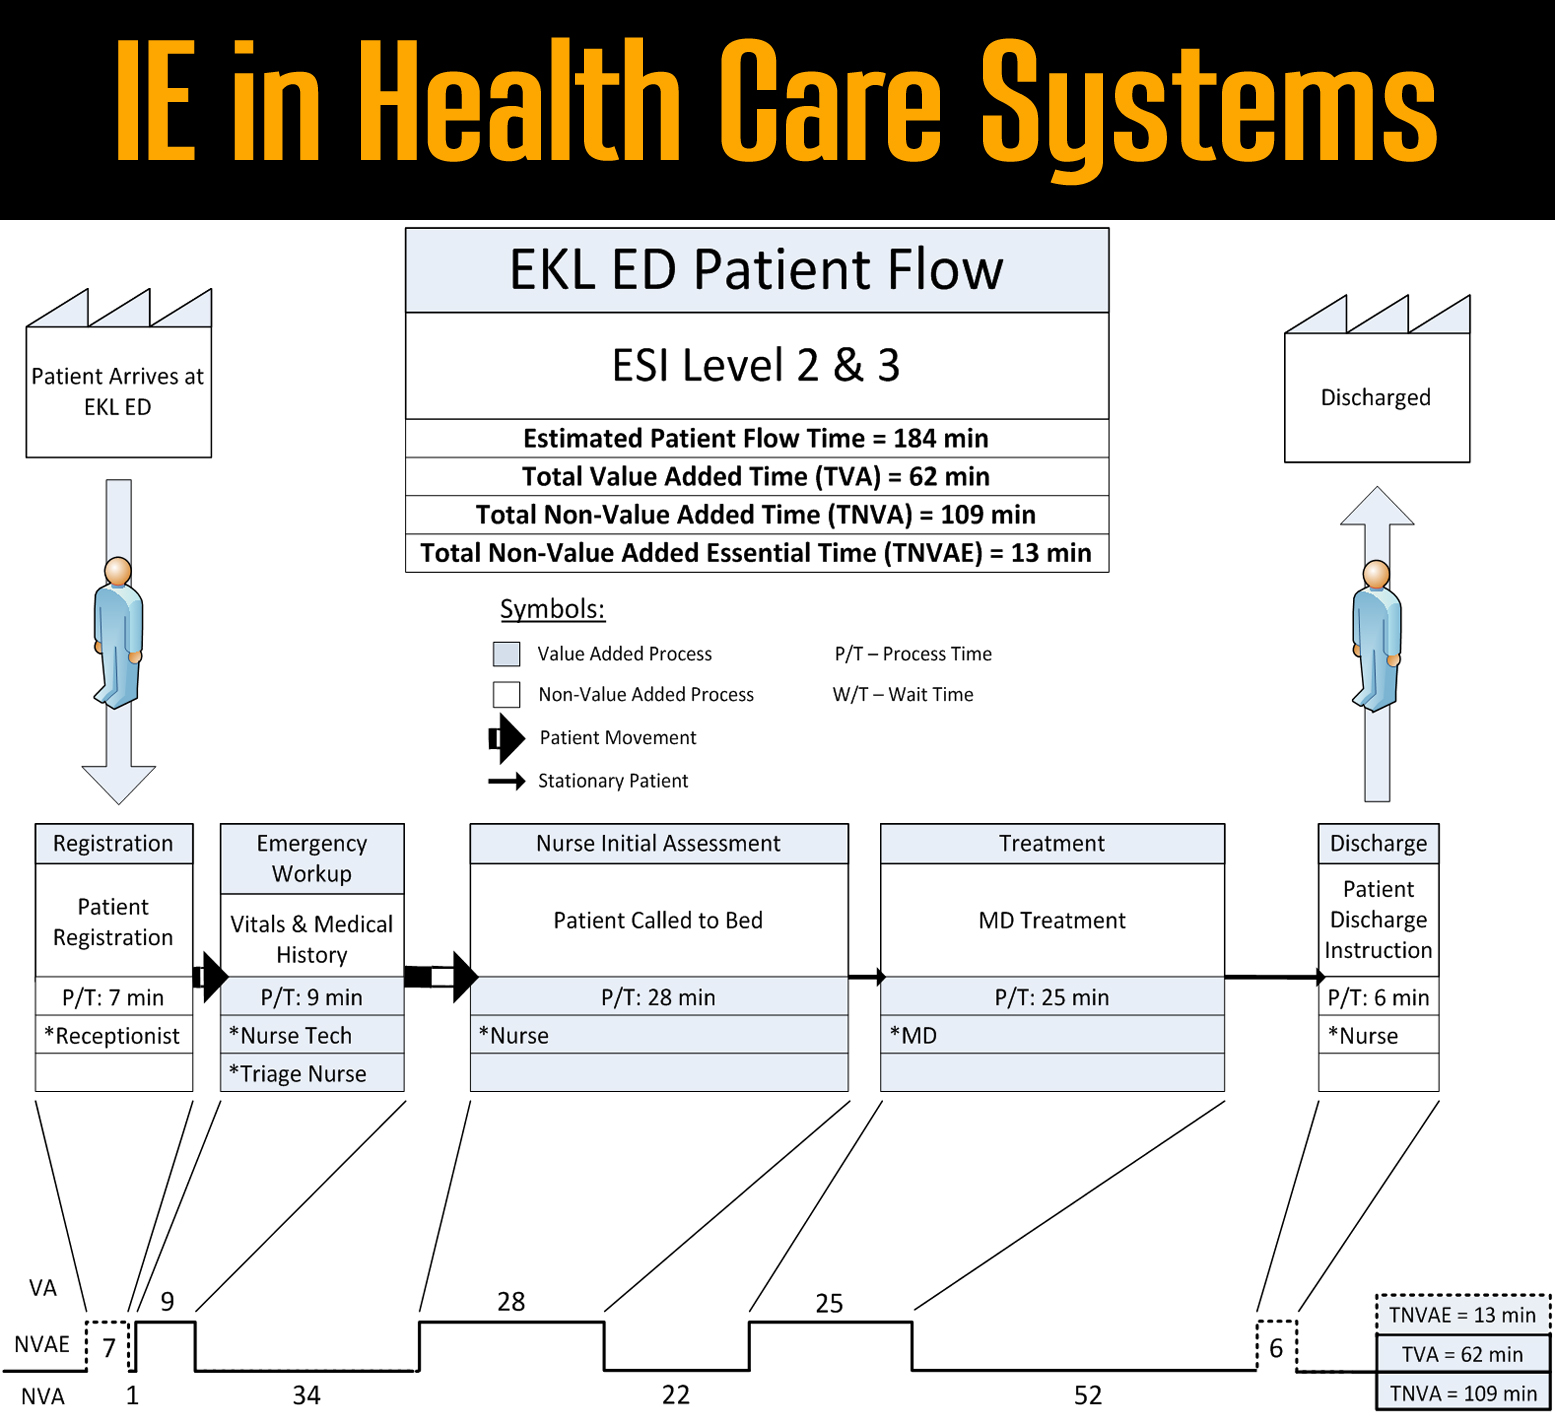 IE in Health Care Systems - An Example: Flowchart explaining logistics of patient being admitted to hospital, beign treated, and discharged.